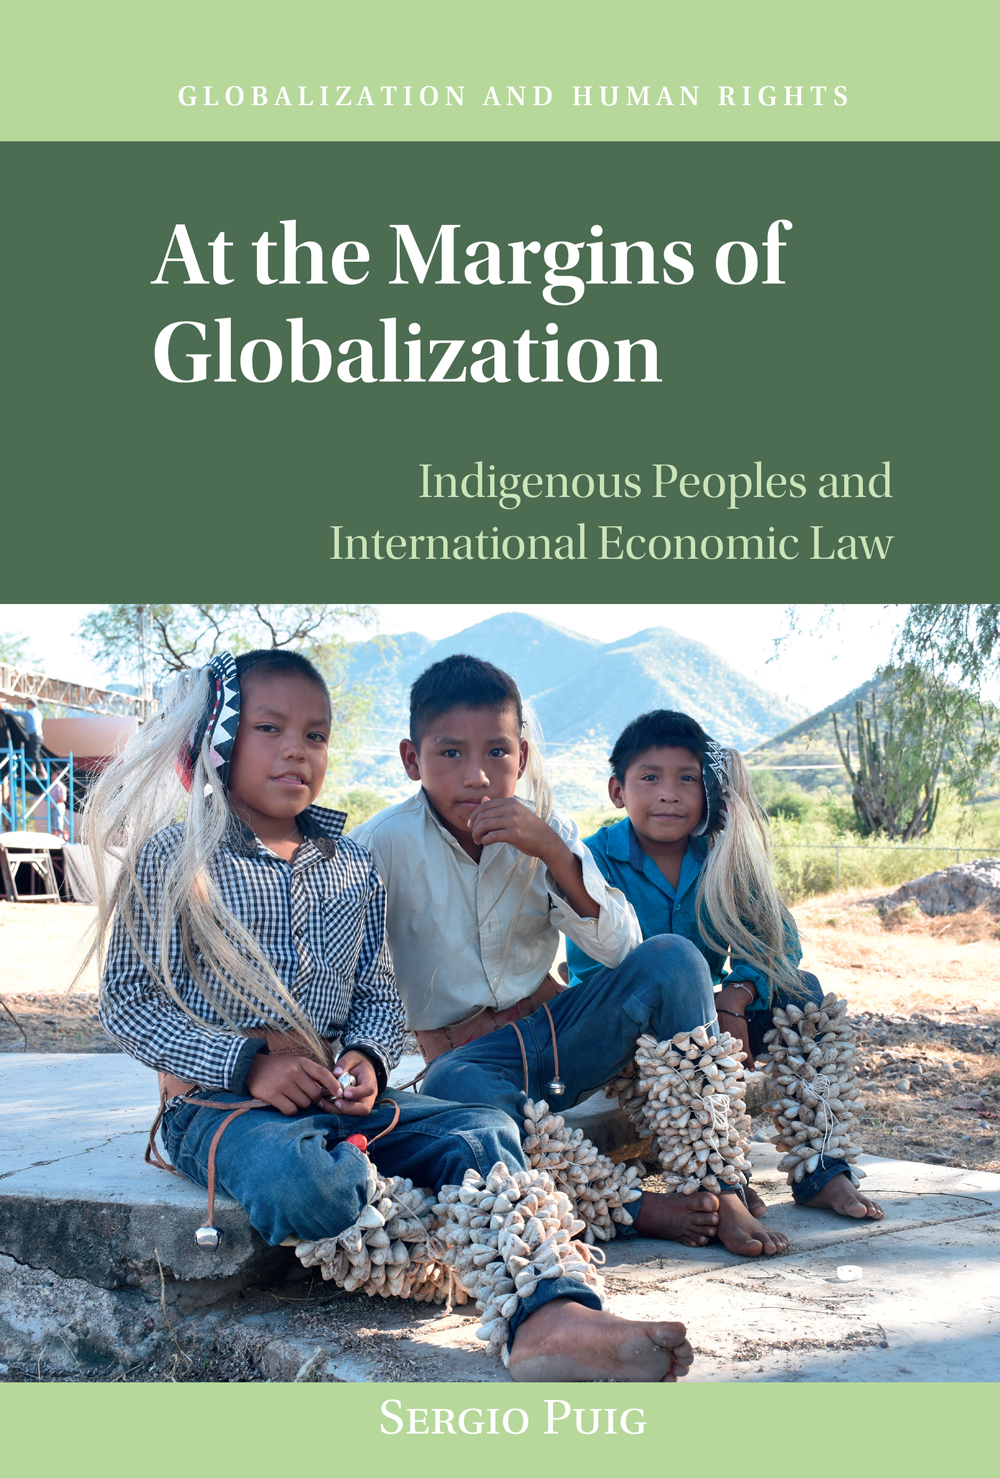 Book cover for "At the Margins of Globalization" by Sergio Puig with photo of three young indigenous boys